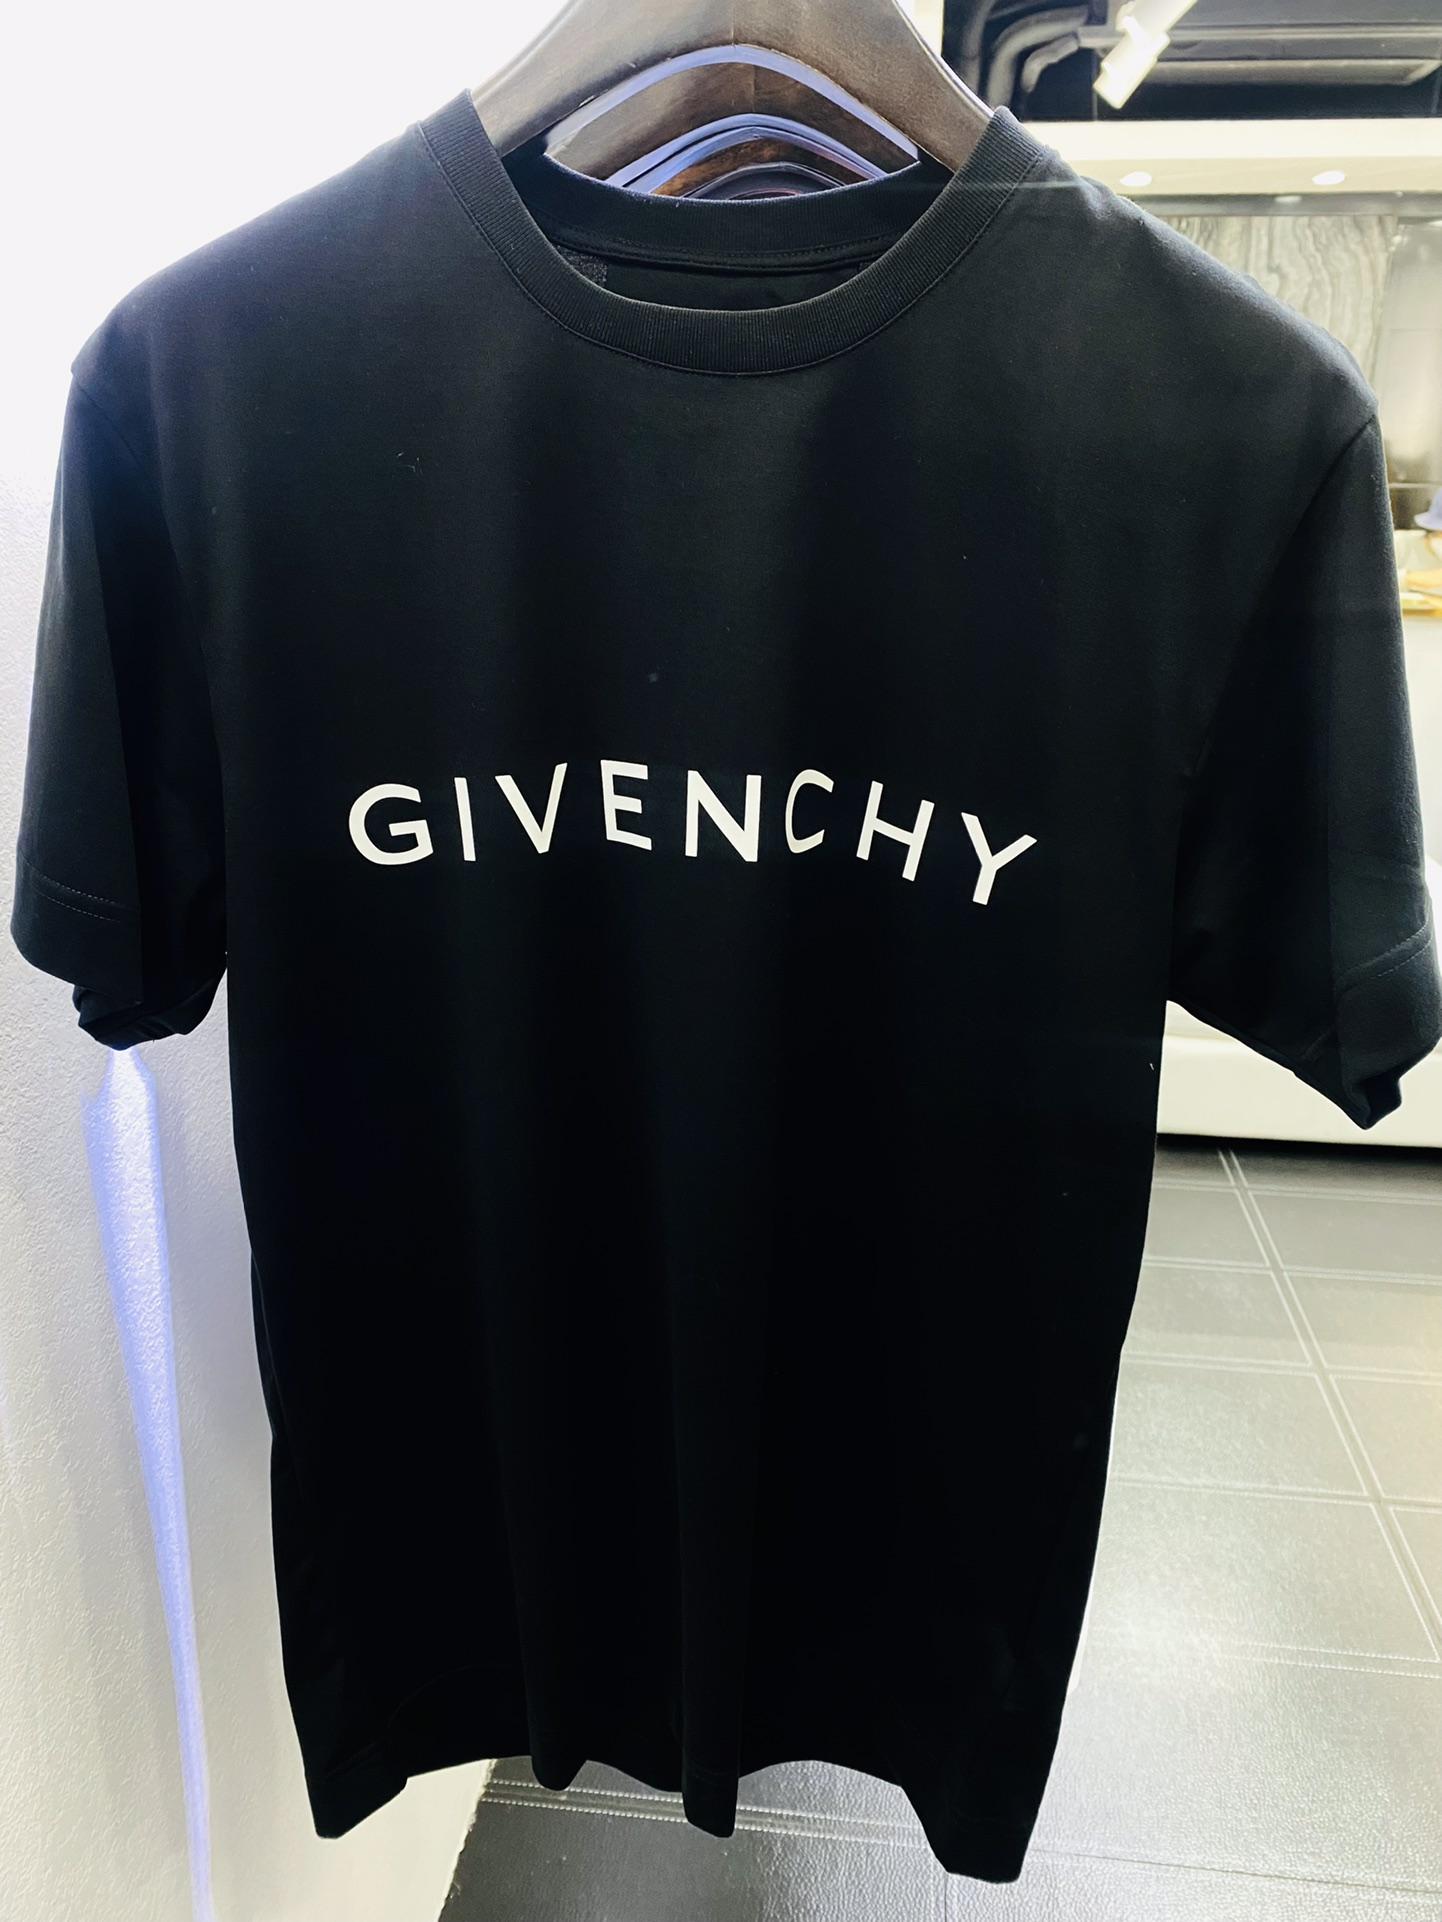 givenchy-archetype-slim-fit-t-shirt-in-cotton-5920_16845011212-1000